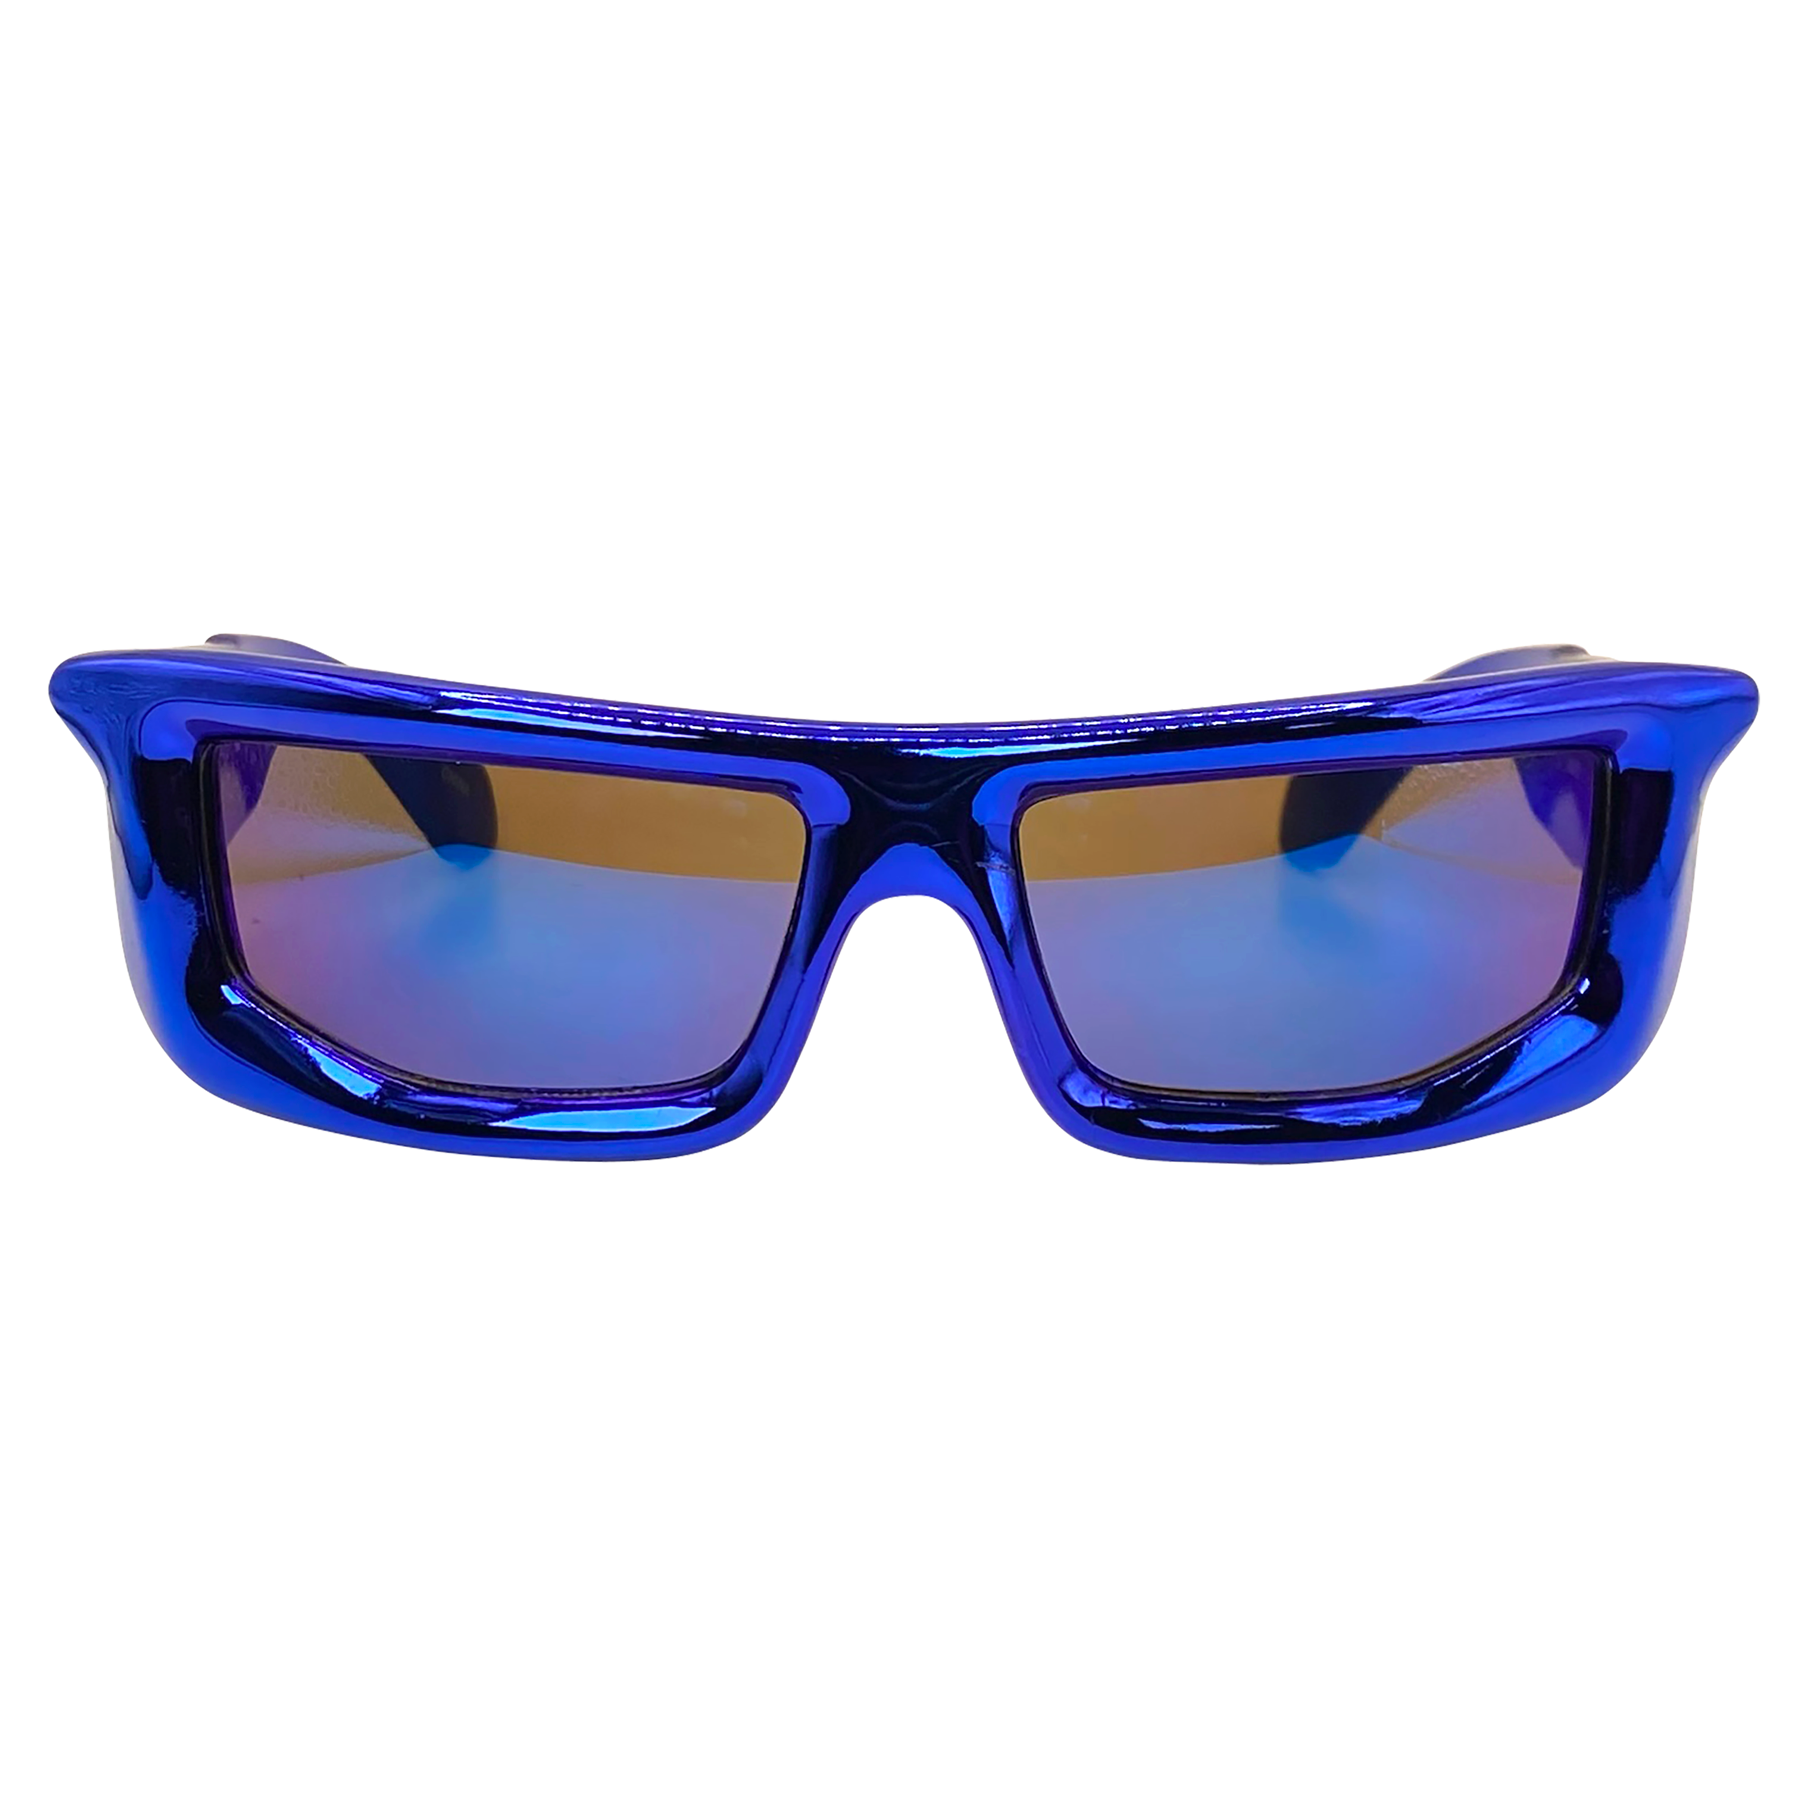 oversized glasses with unique blue chrome style frame and RV lens